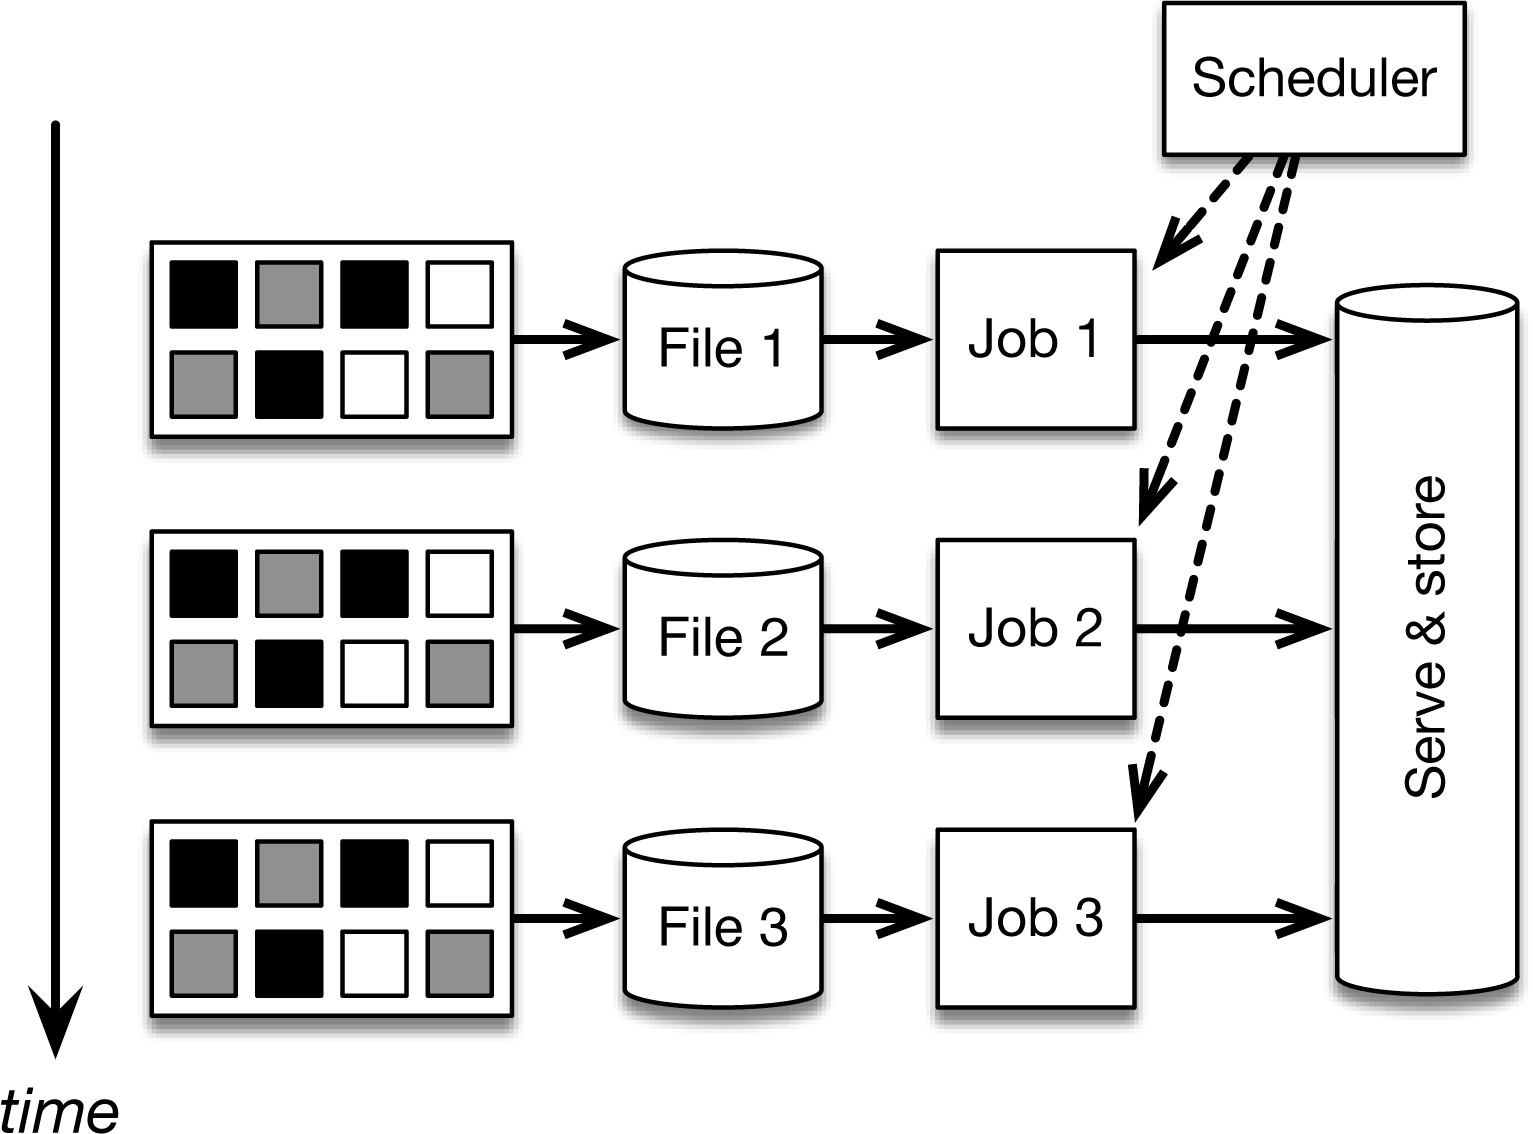 Implementing continuous applications using periodic batch jobs. Data is continuously sliced into files, possibly on an hourly basis, and batch jobs are run with these files as input, giving an impression of a continuous processing of incoming data.